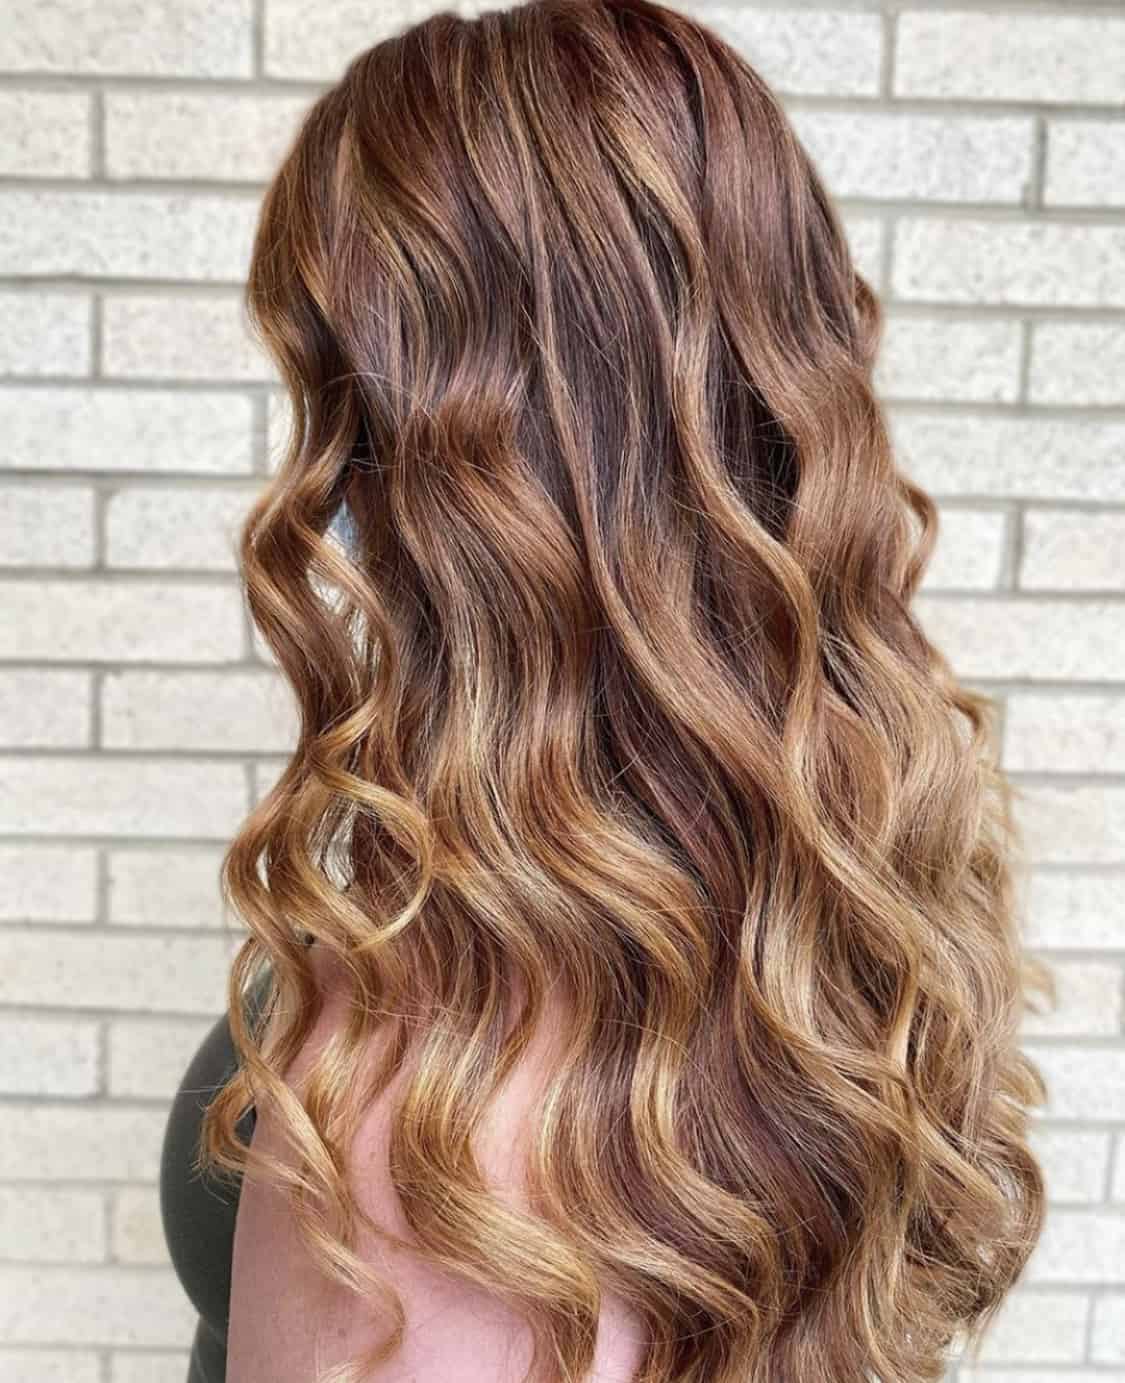 Is it possible to get a perm that doesn't look like 80s hair? (more info in  photo captions) : r/Hair